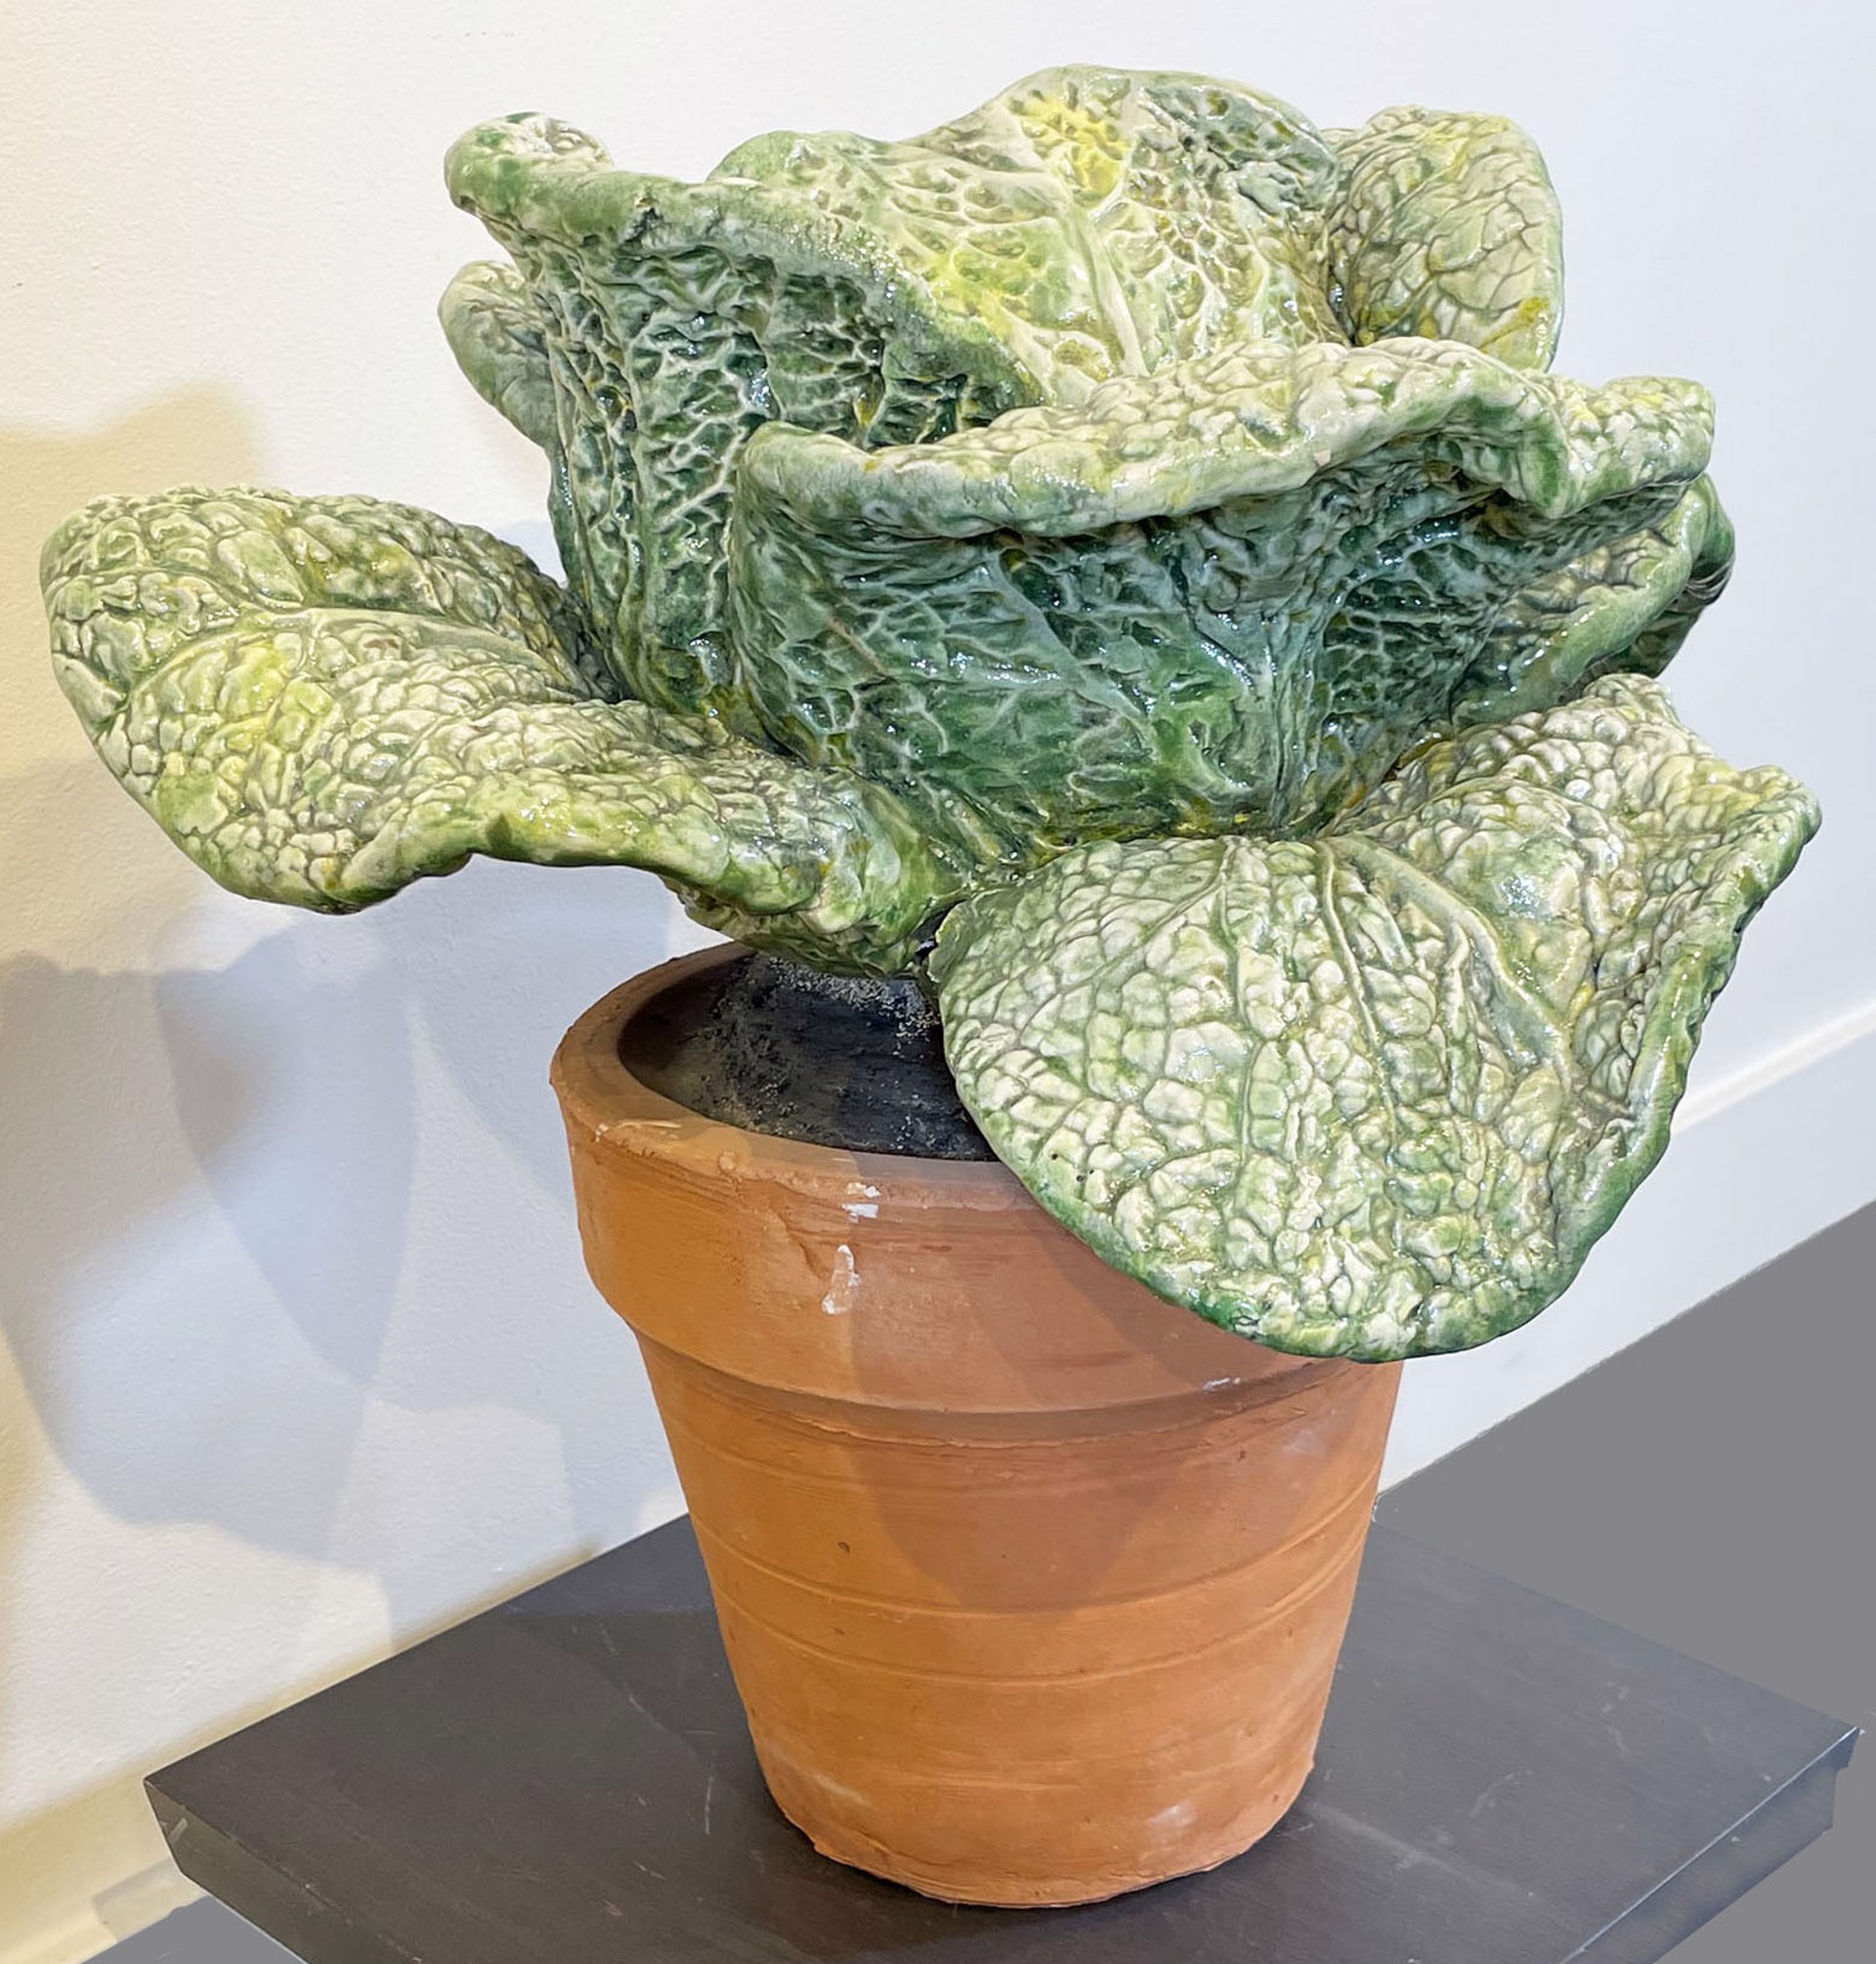 Untitled (cabbage in pot), 1980 by Victor Cicansky